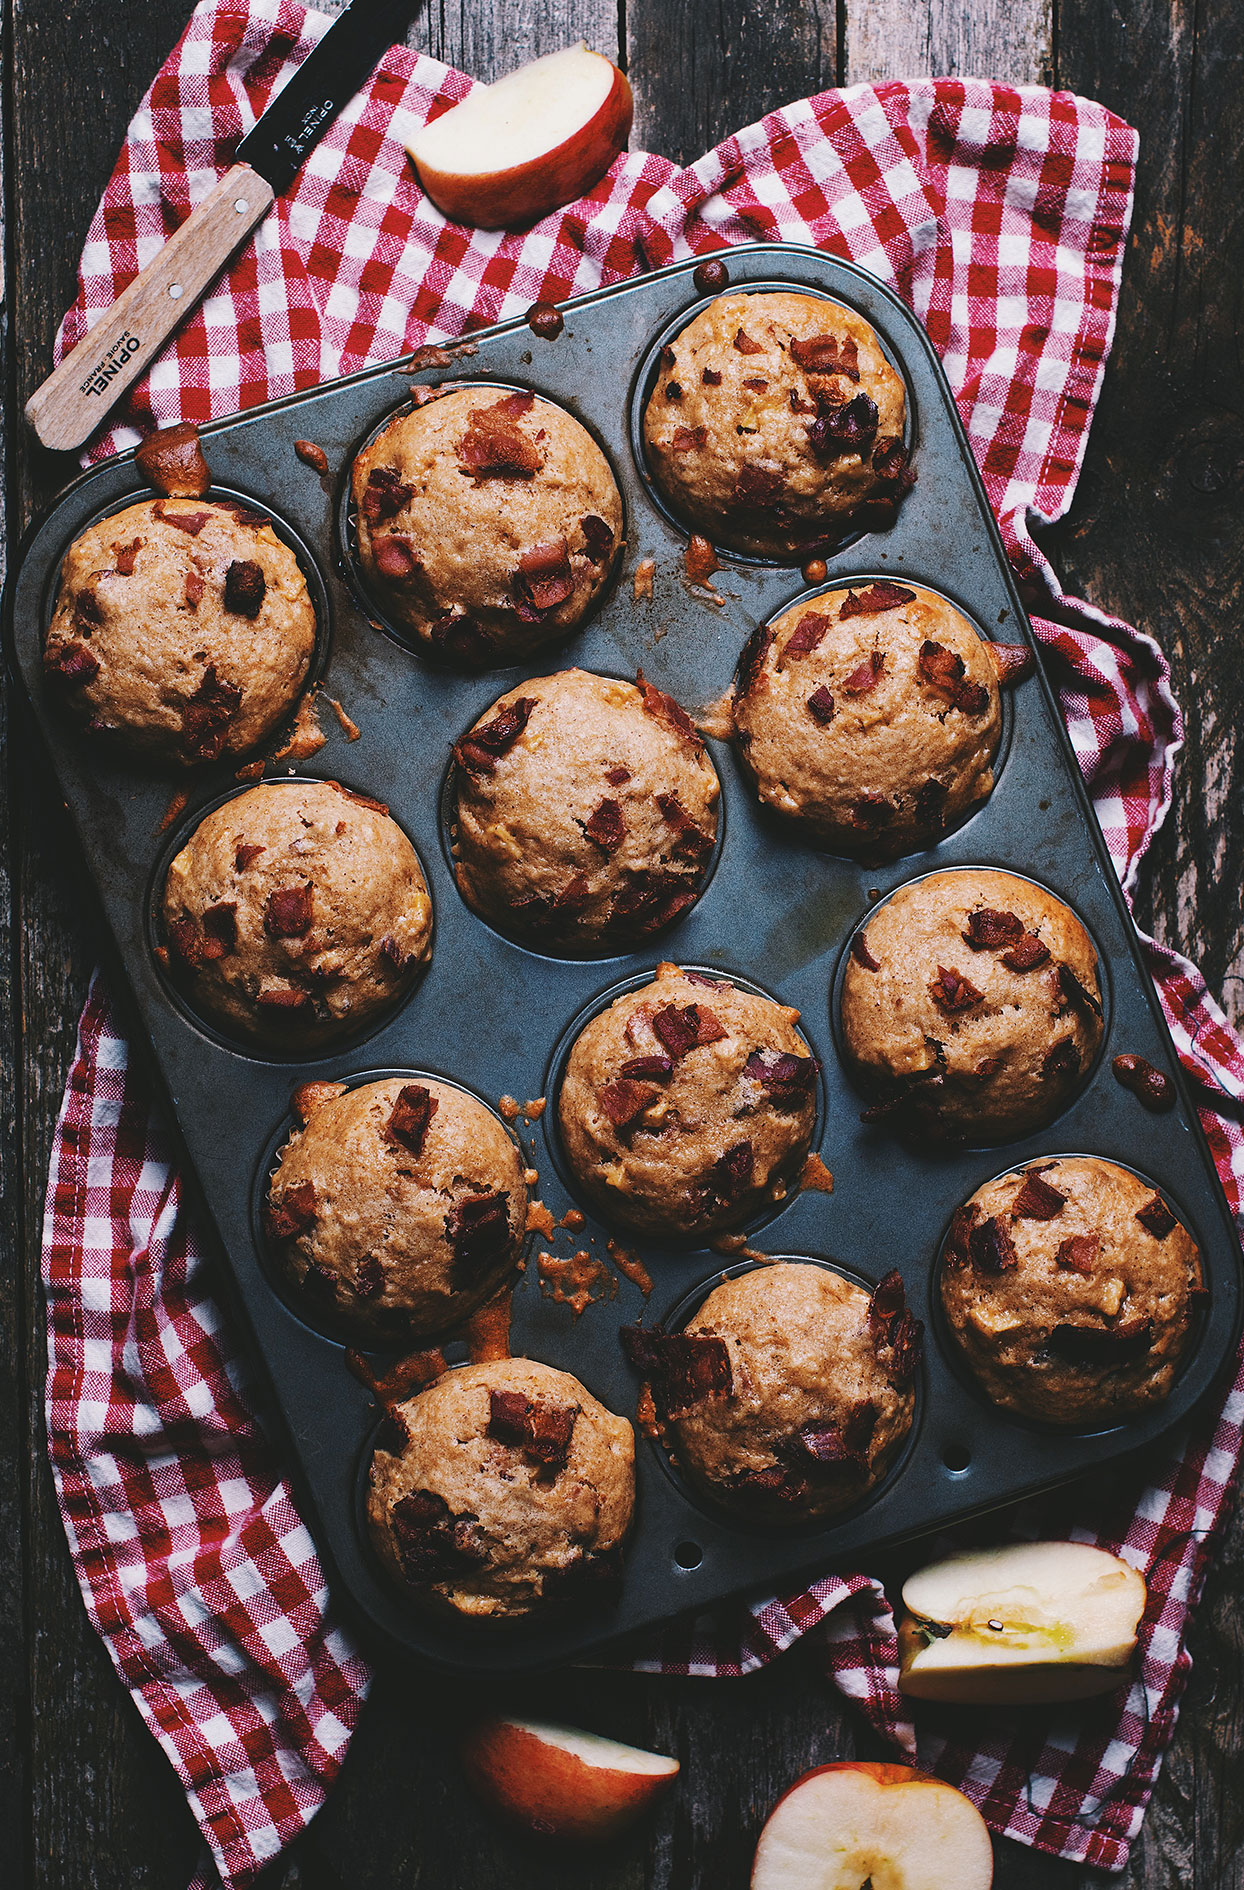 Apple and maple bacon muffins